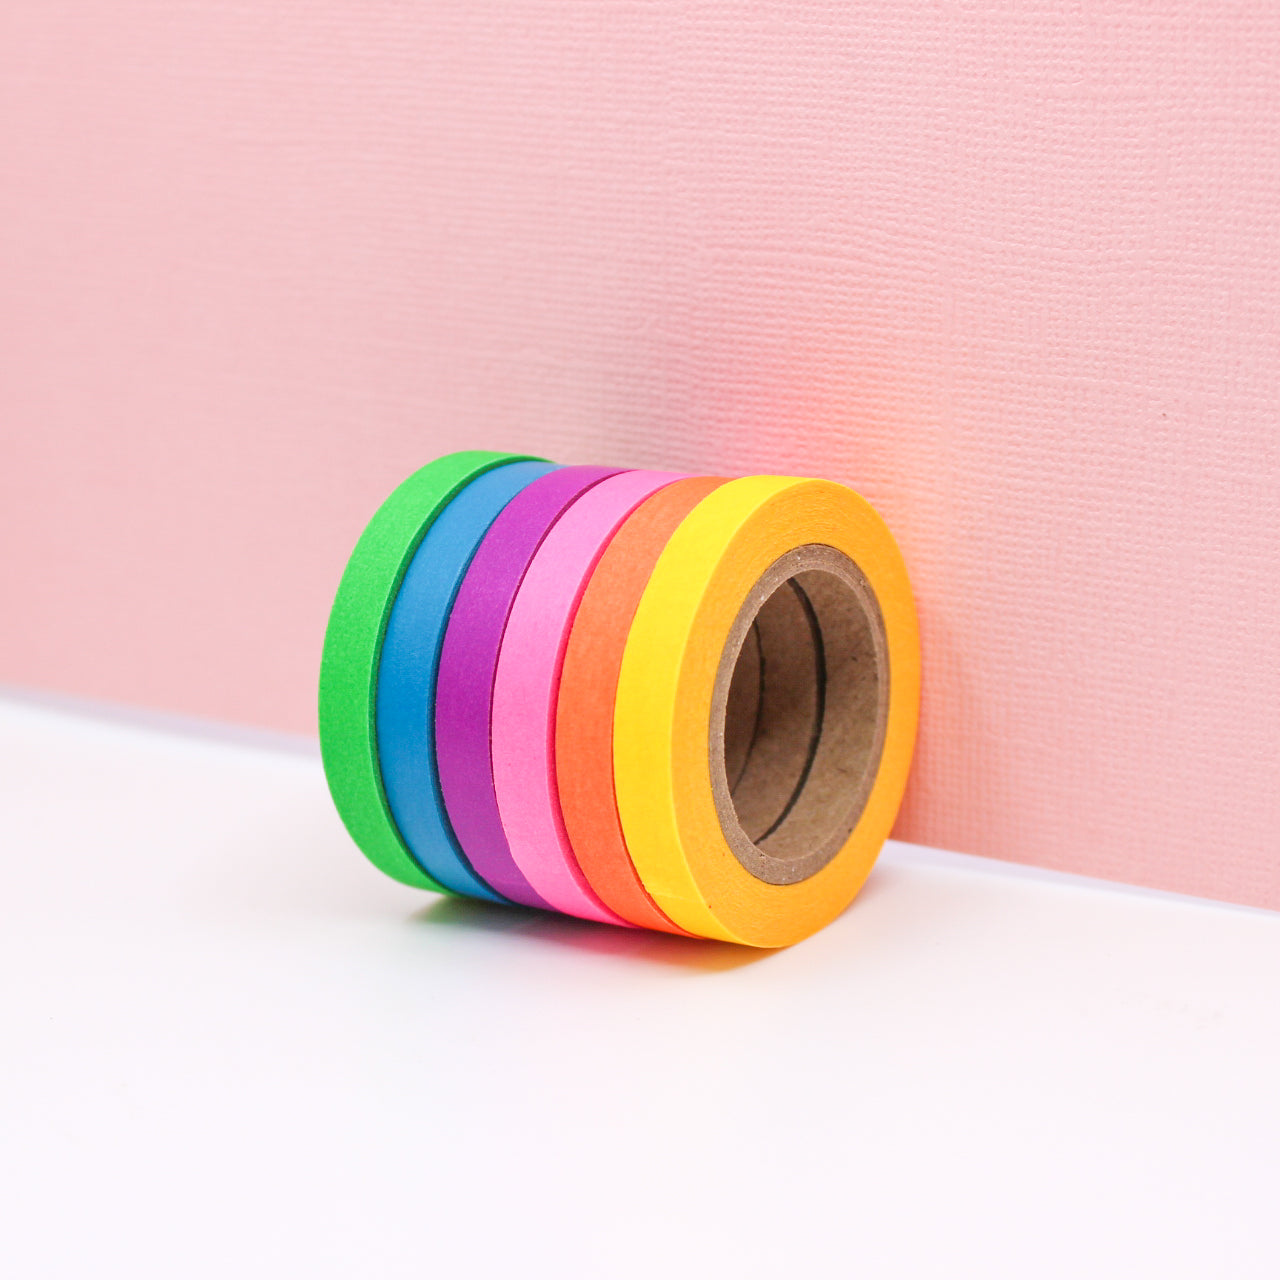 Brighten up your crafts with our Neon Color Narrow Solid Washi Tape Set. This set includes a selection of narrow washi tapes in vivid neon colors, perfect for adding a bold and electrifying touch to your projects. This tape is sold at BBB Supplies Craft Shop.